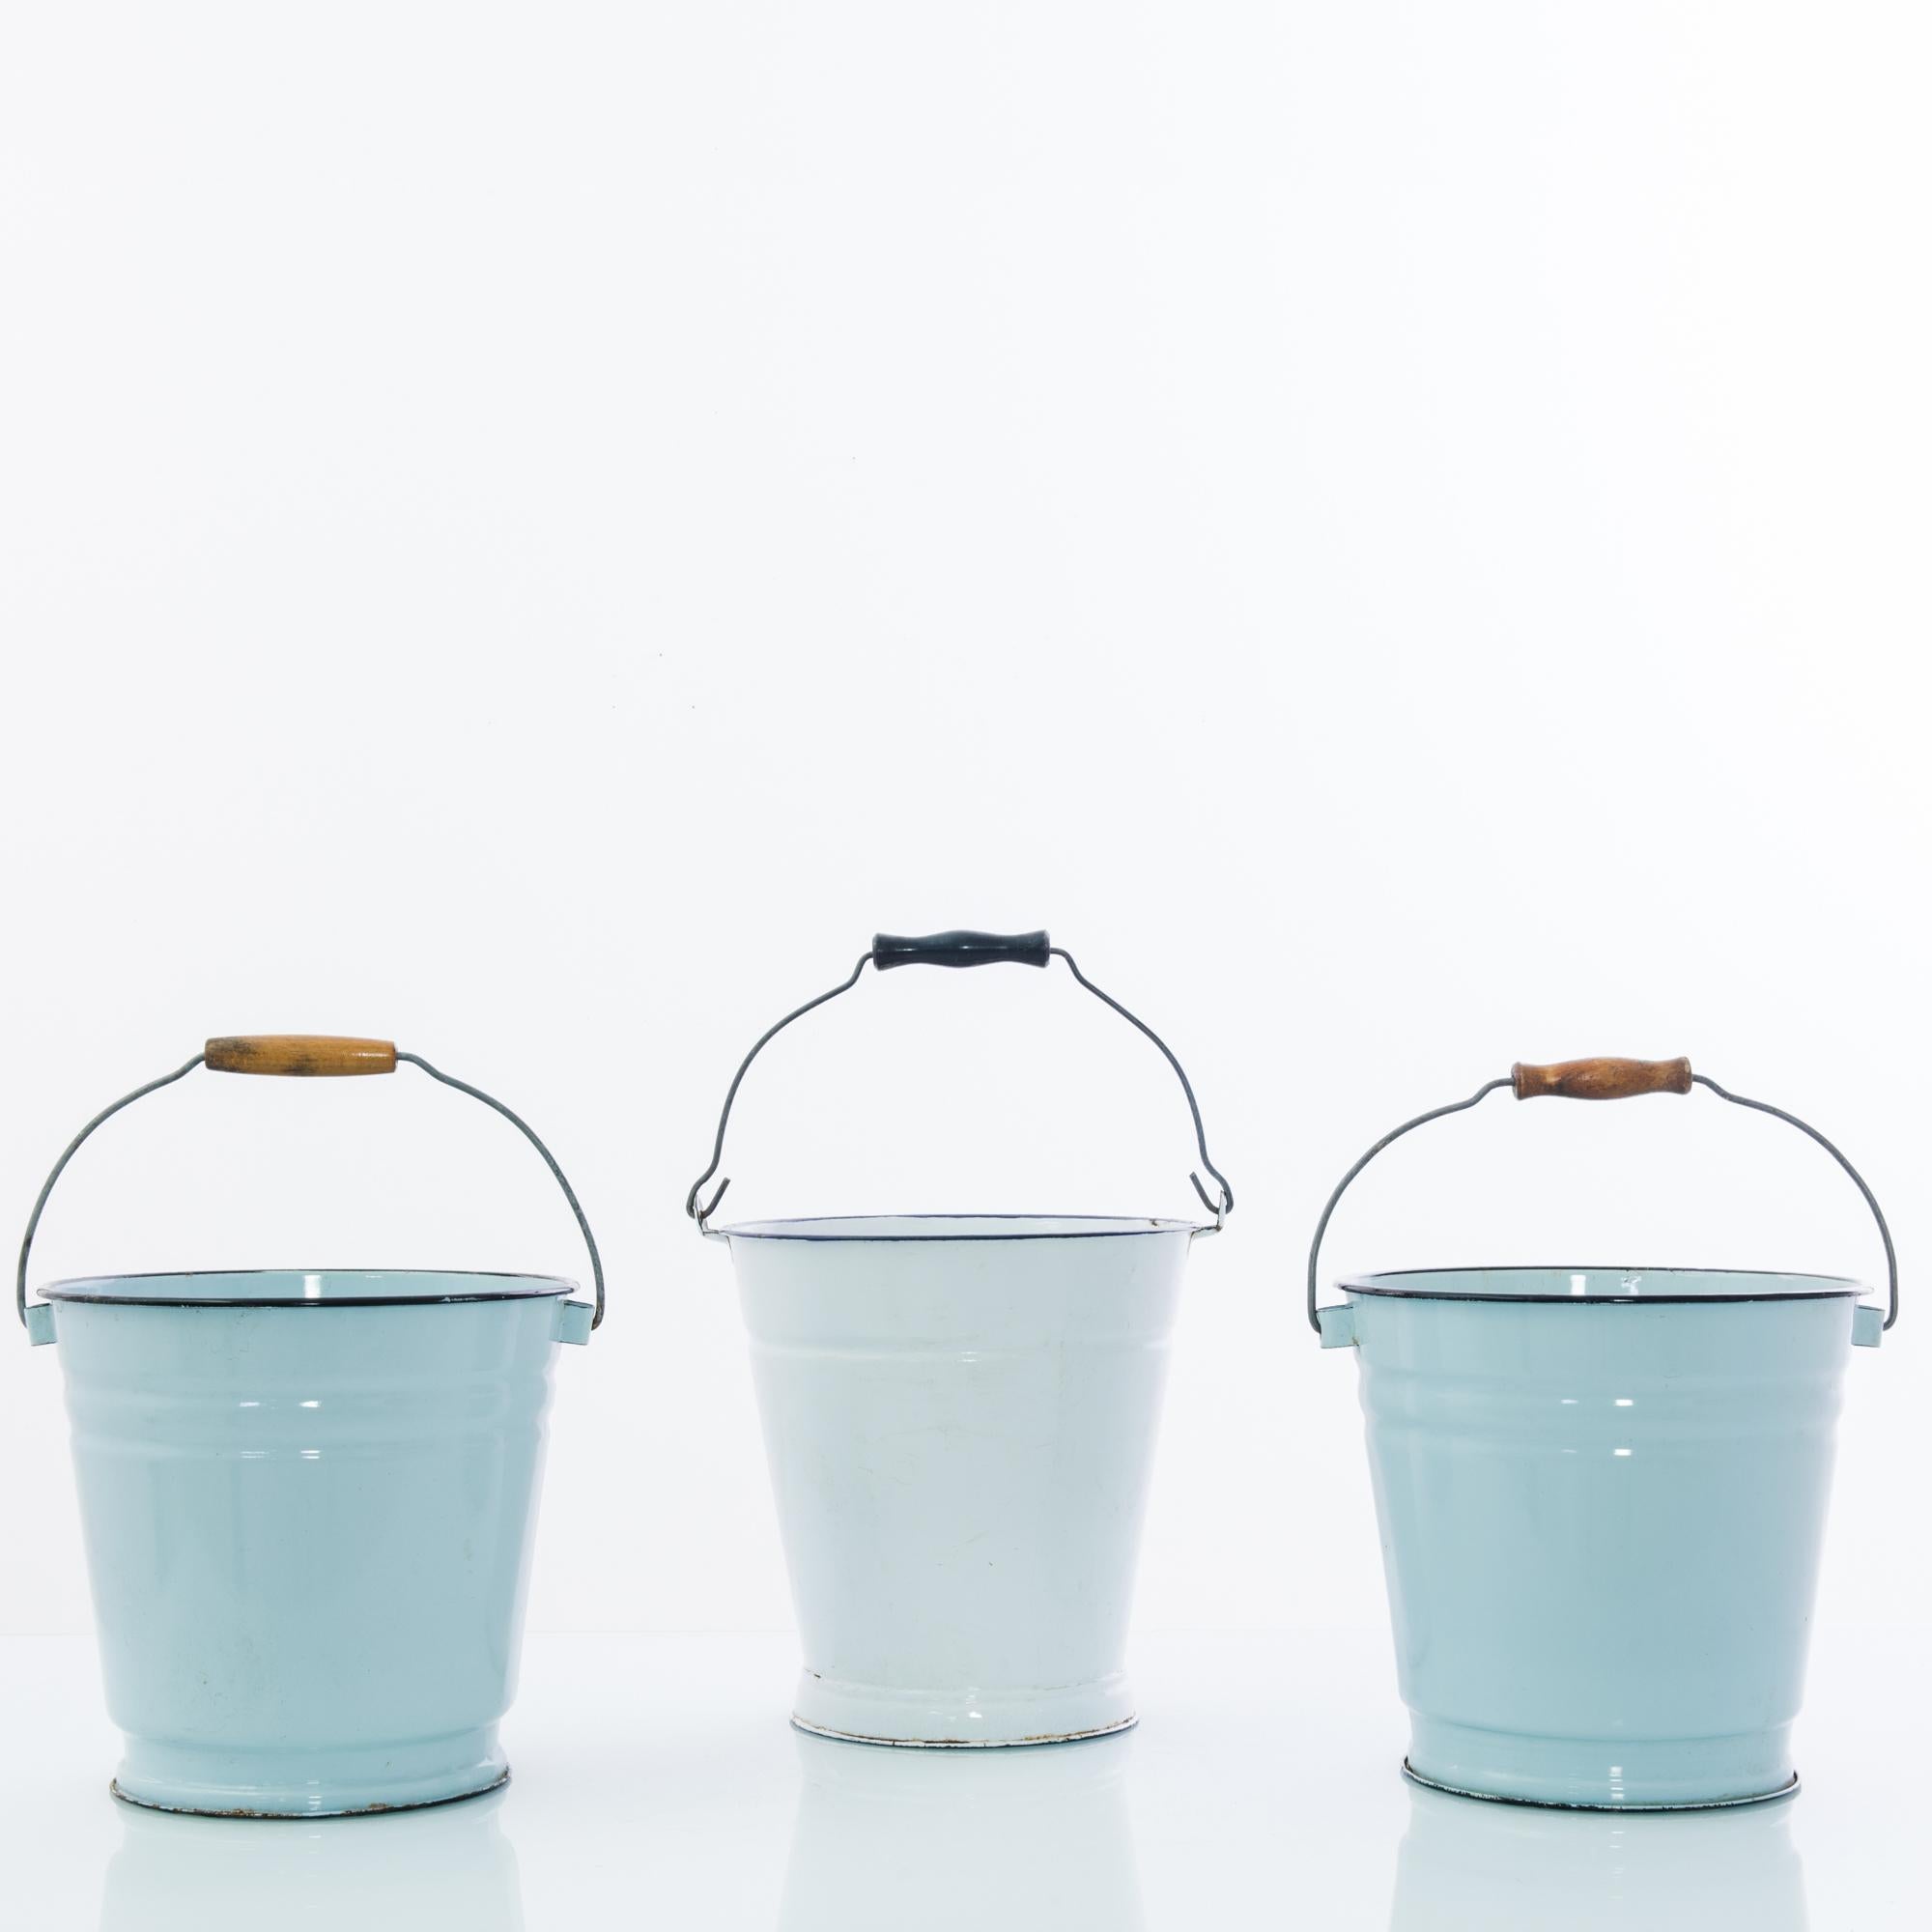 A metal bucket from 1950s Czechia. Bright enamel in pastel hues lends a charming vintage tone to the classic silhouette. The pail is crowned by a handle of metal wire; the wooden handgrip is worn to a patinated shine through use. Nostalgic yet